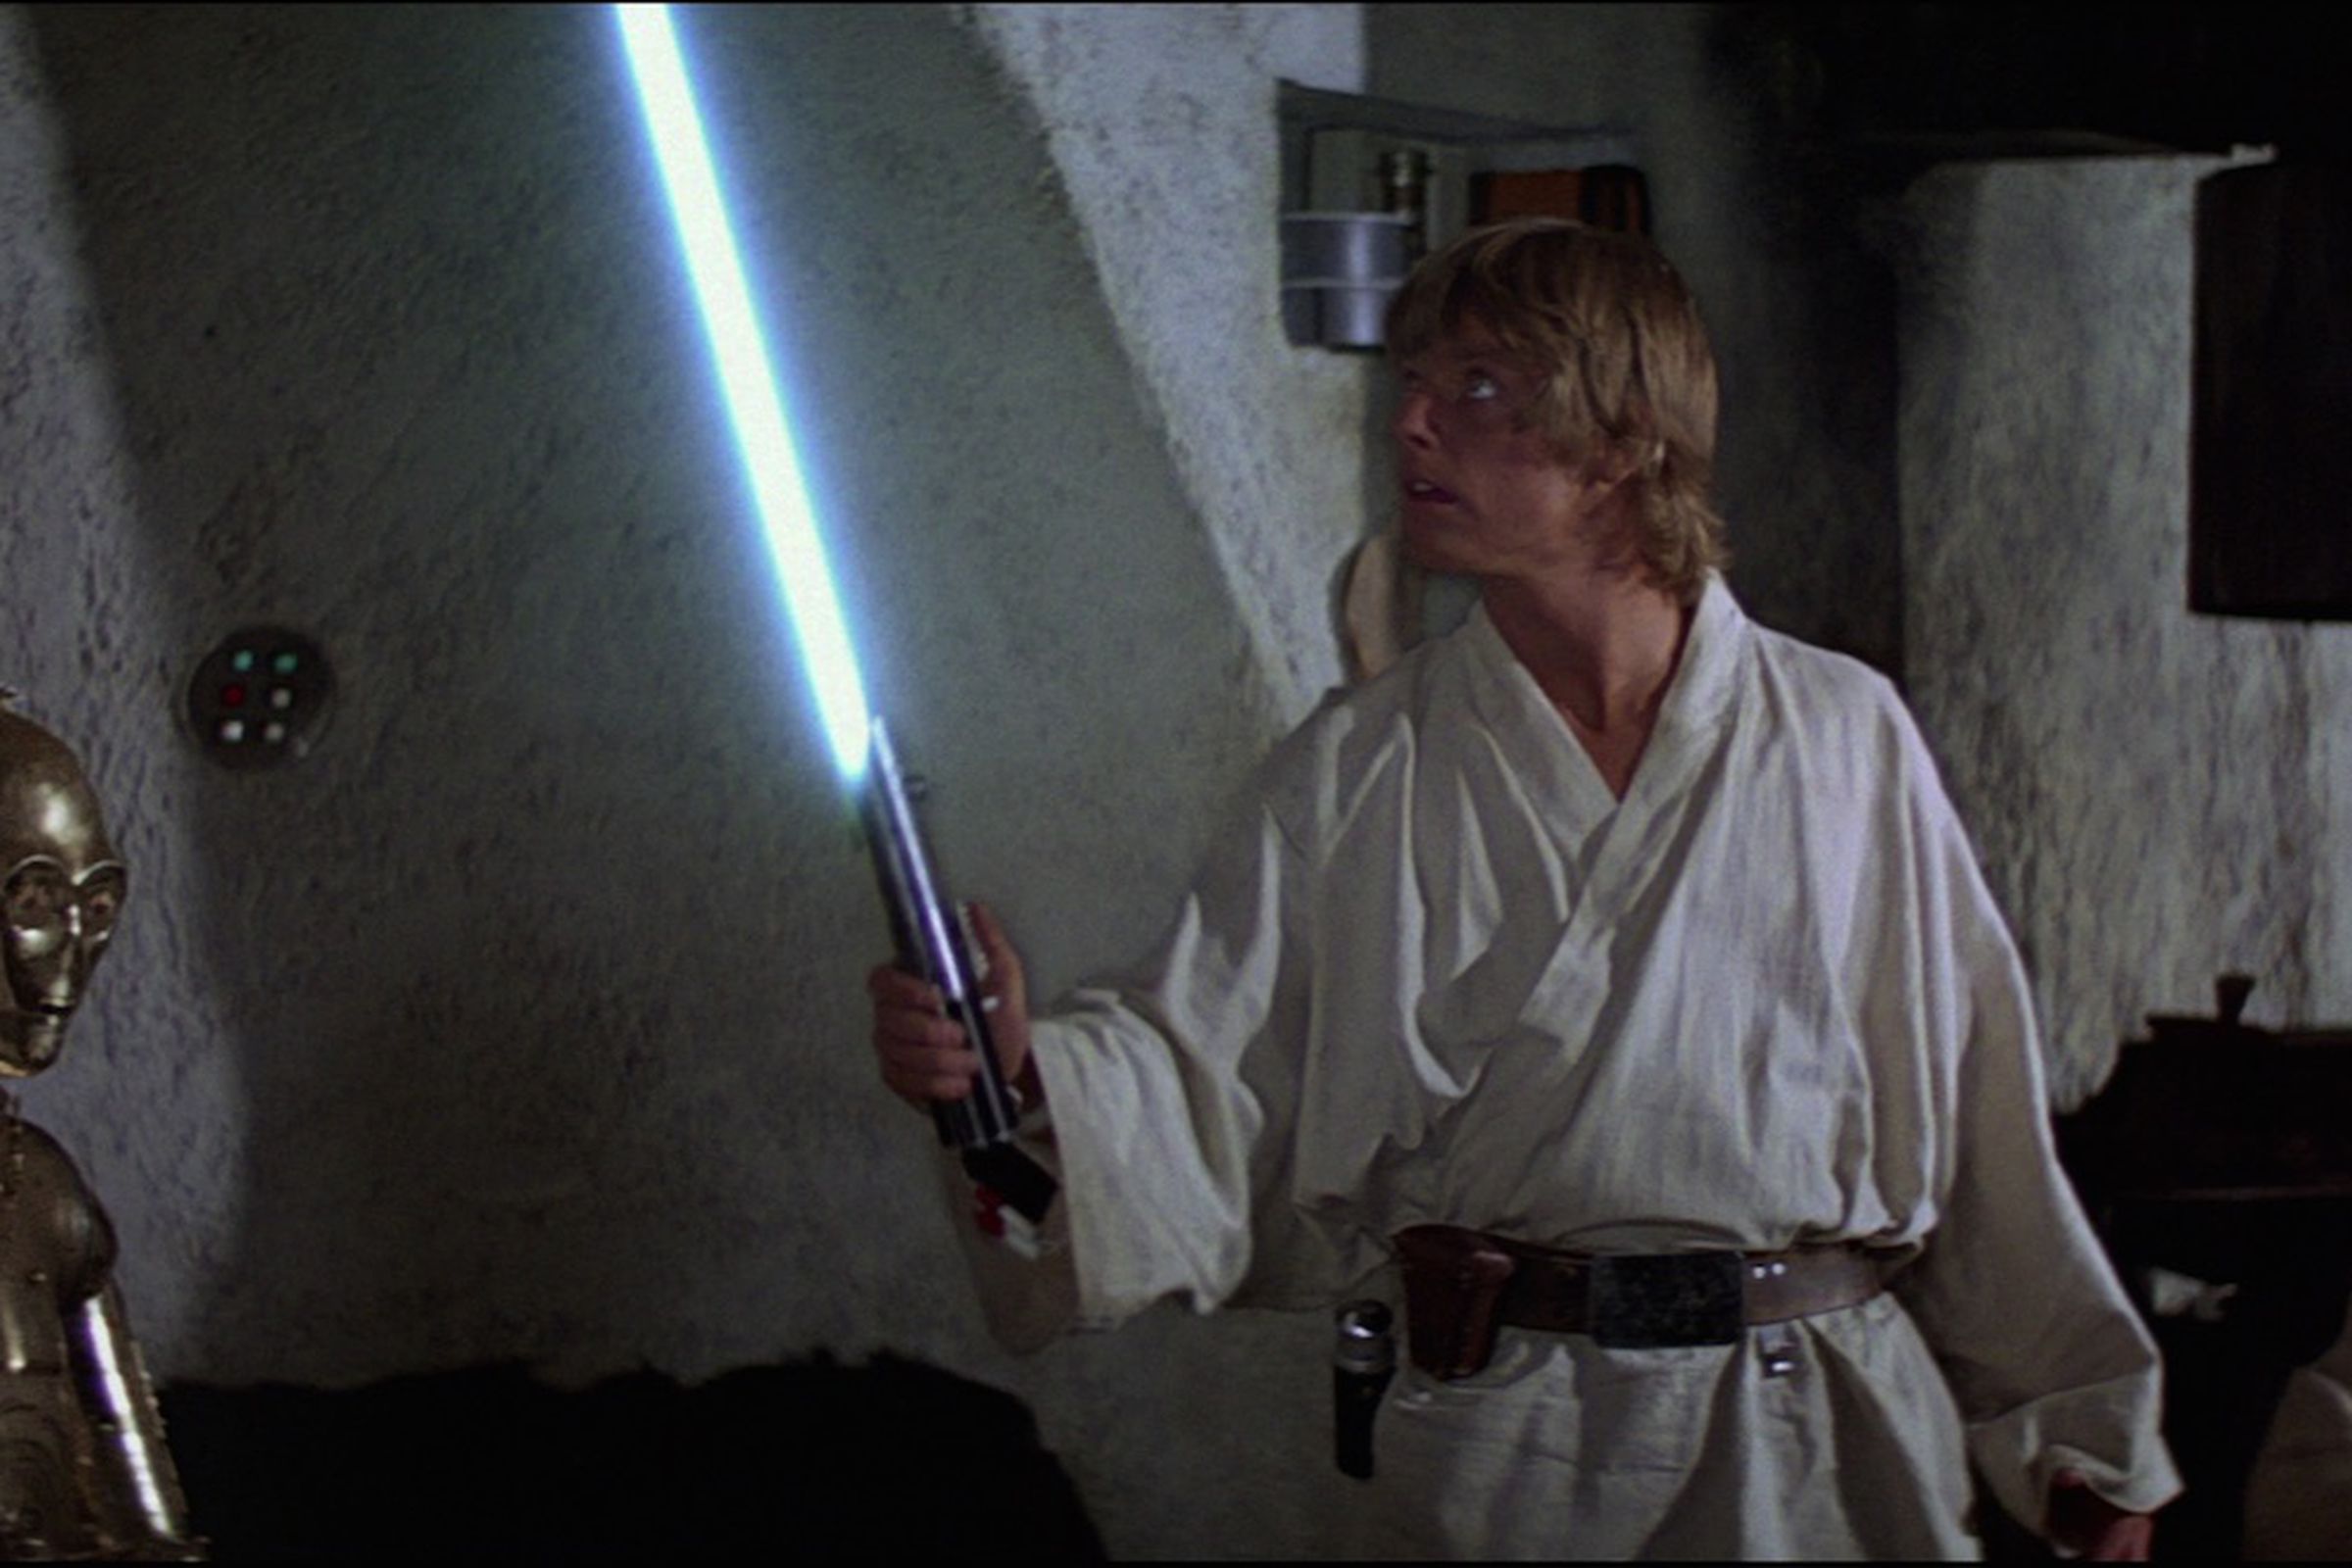 The weapon first appeared in 1977’s Star Wars.